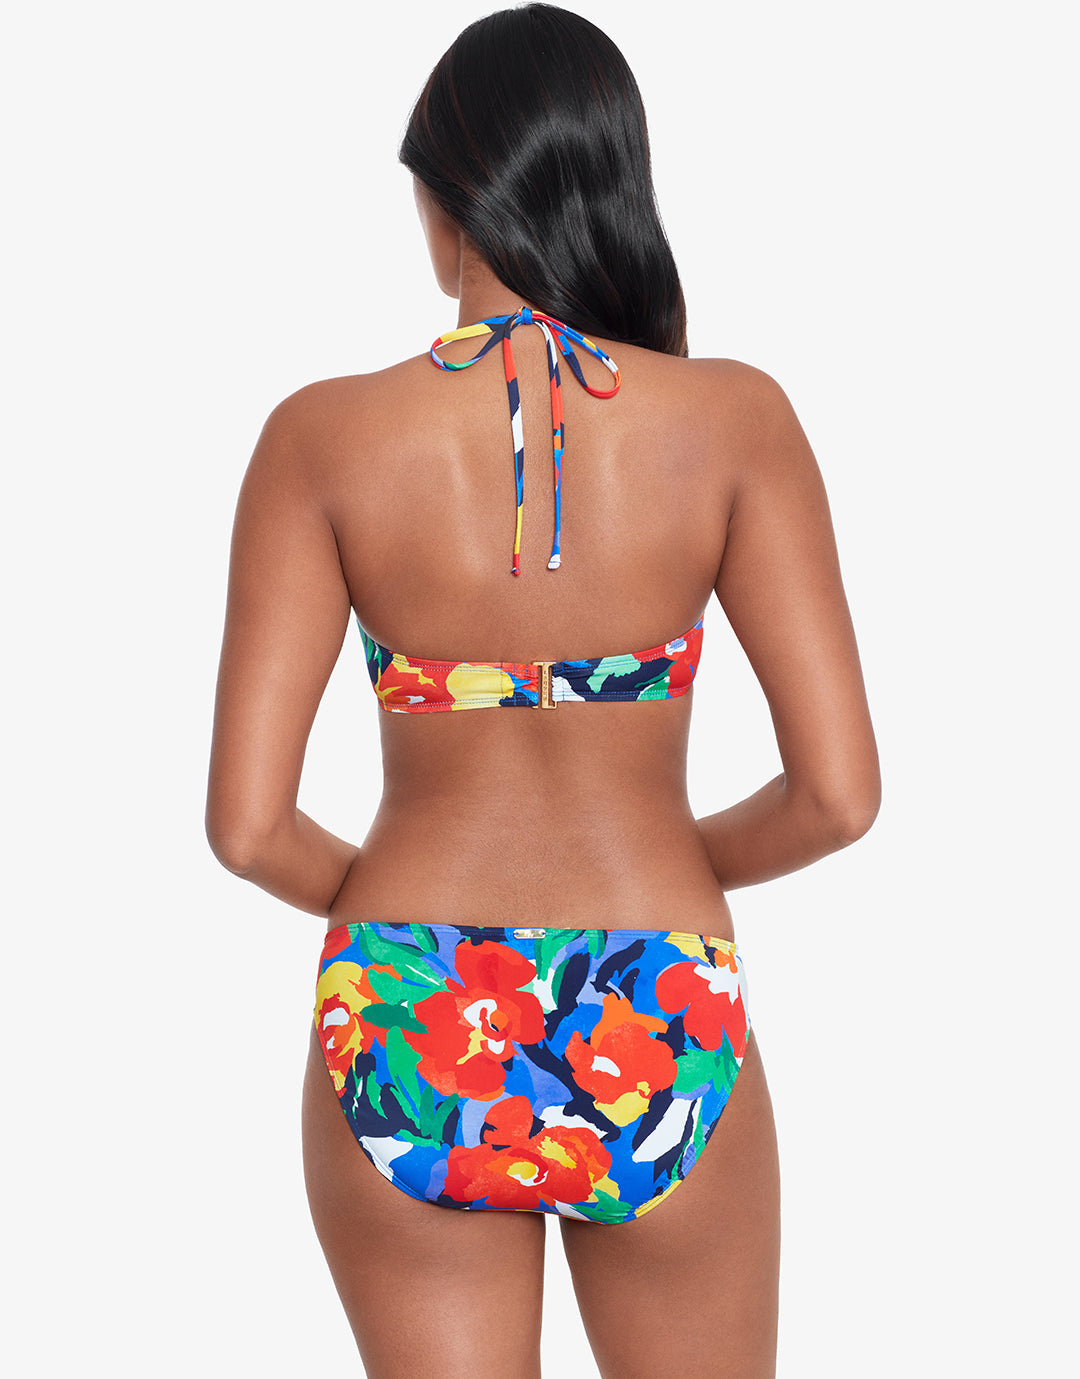 Bold Abstract Floral V Wire Bandeau Bikini Top - Simply Beach UK